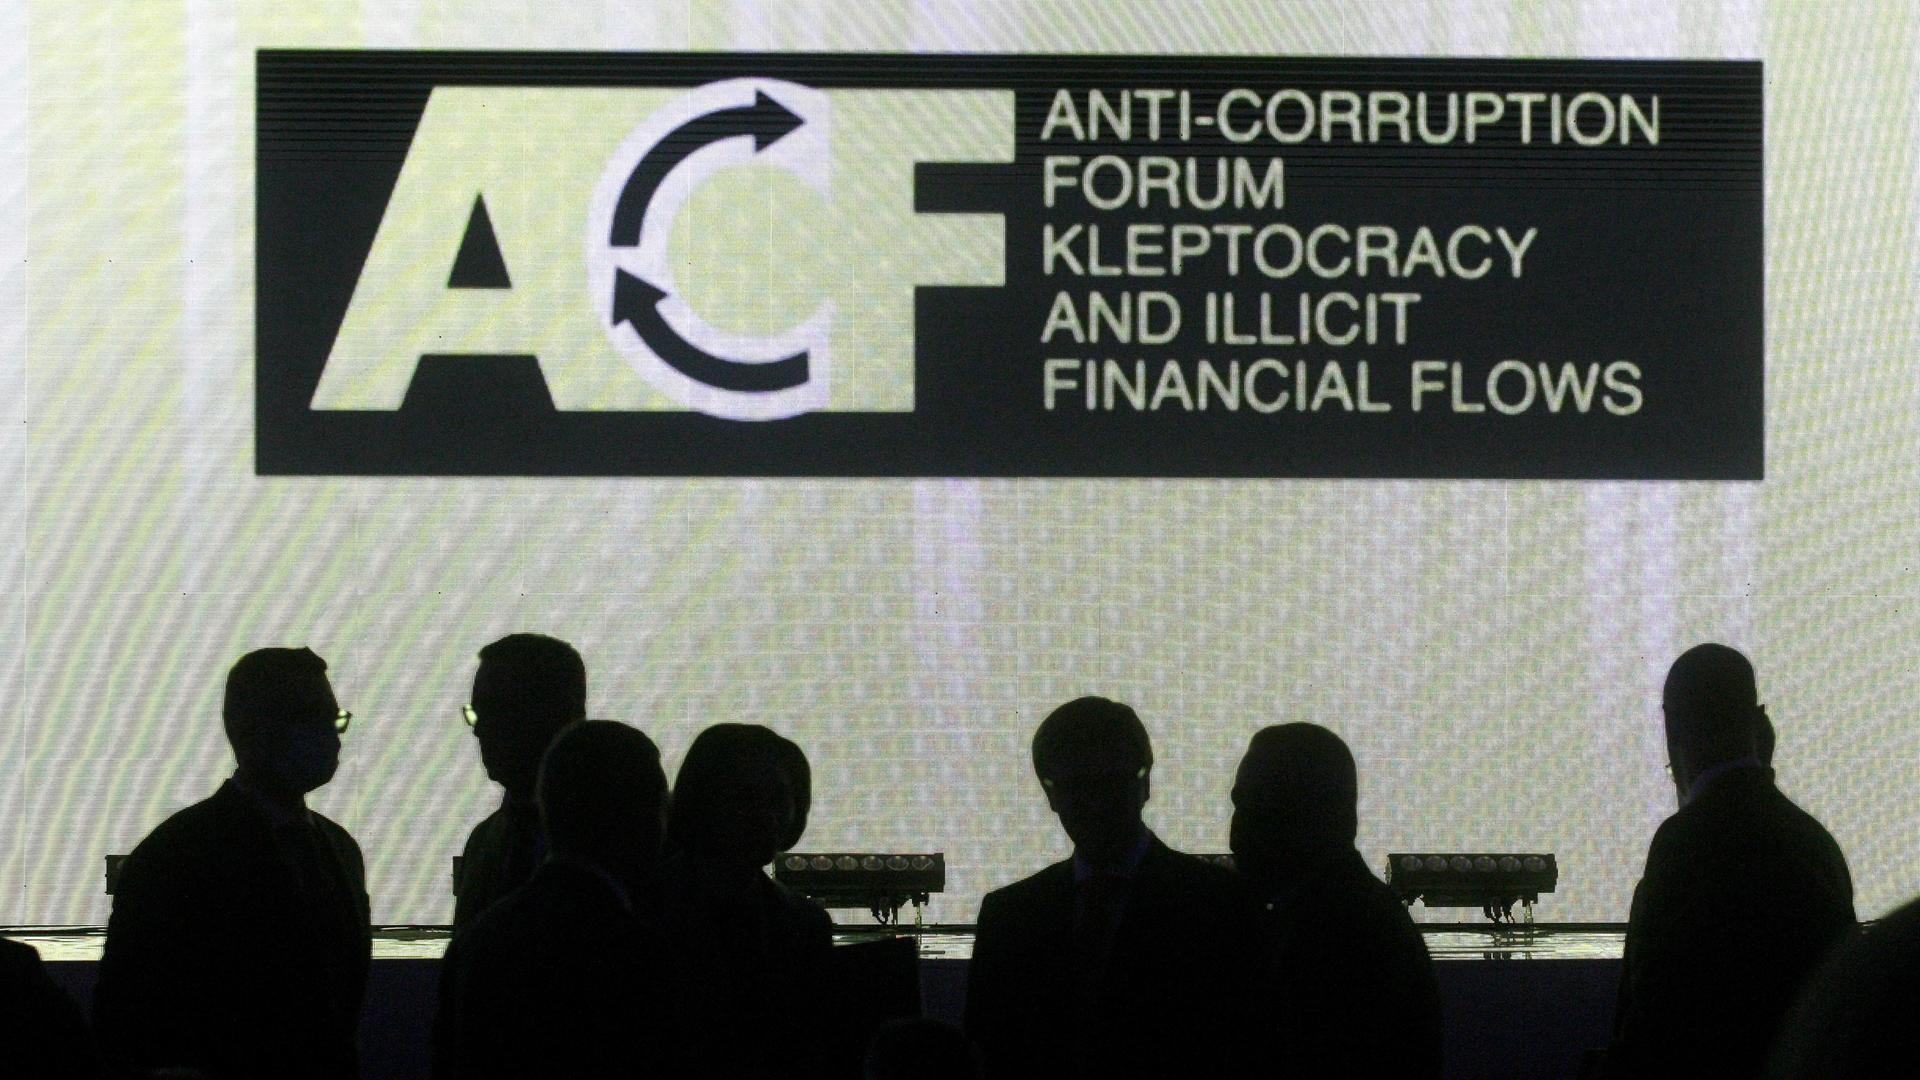 The Kleptocracy and Illicit Financial Flows Anti-Corruption Forum dedicated to the 30th anniversary of Ukraine's Prosecutor General's Office takes place in Kyiv, capital of Ukraine., Credit:Yevhen Kotenko / Avalon